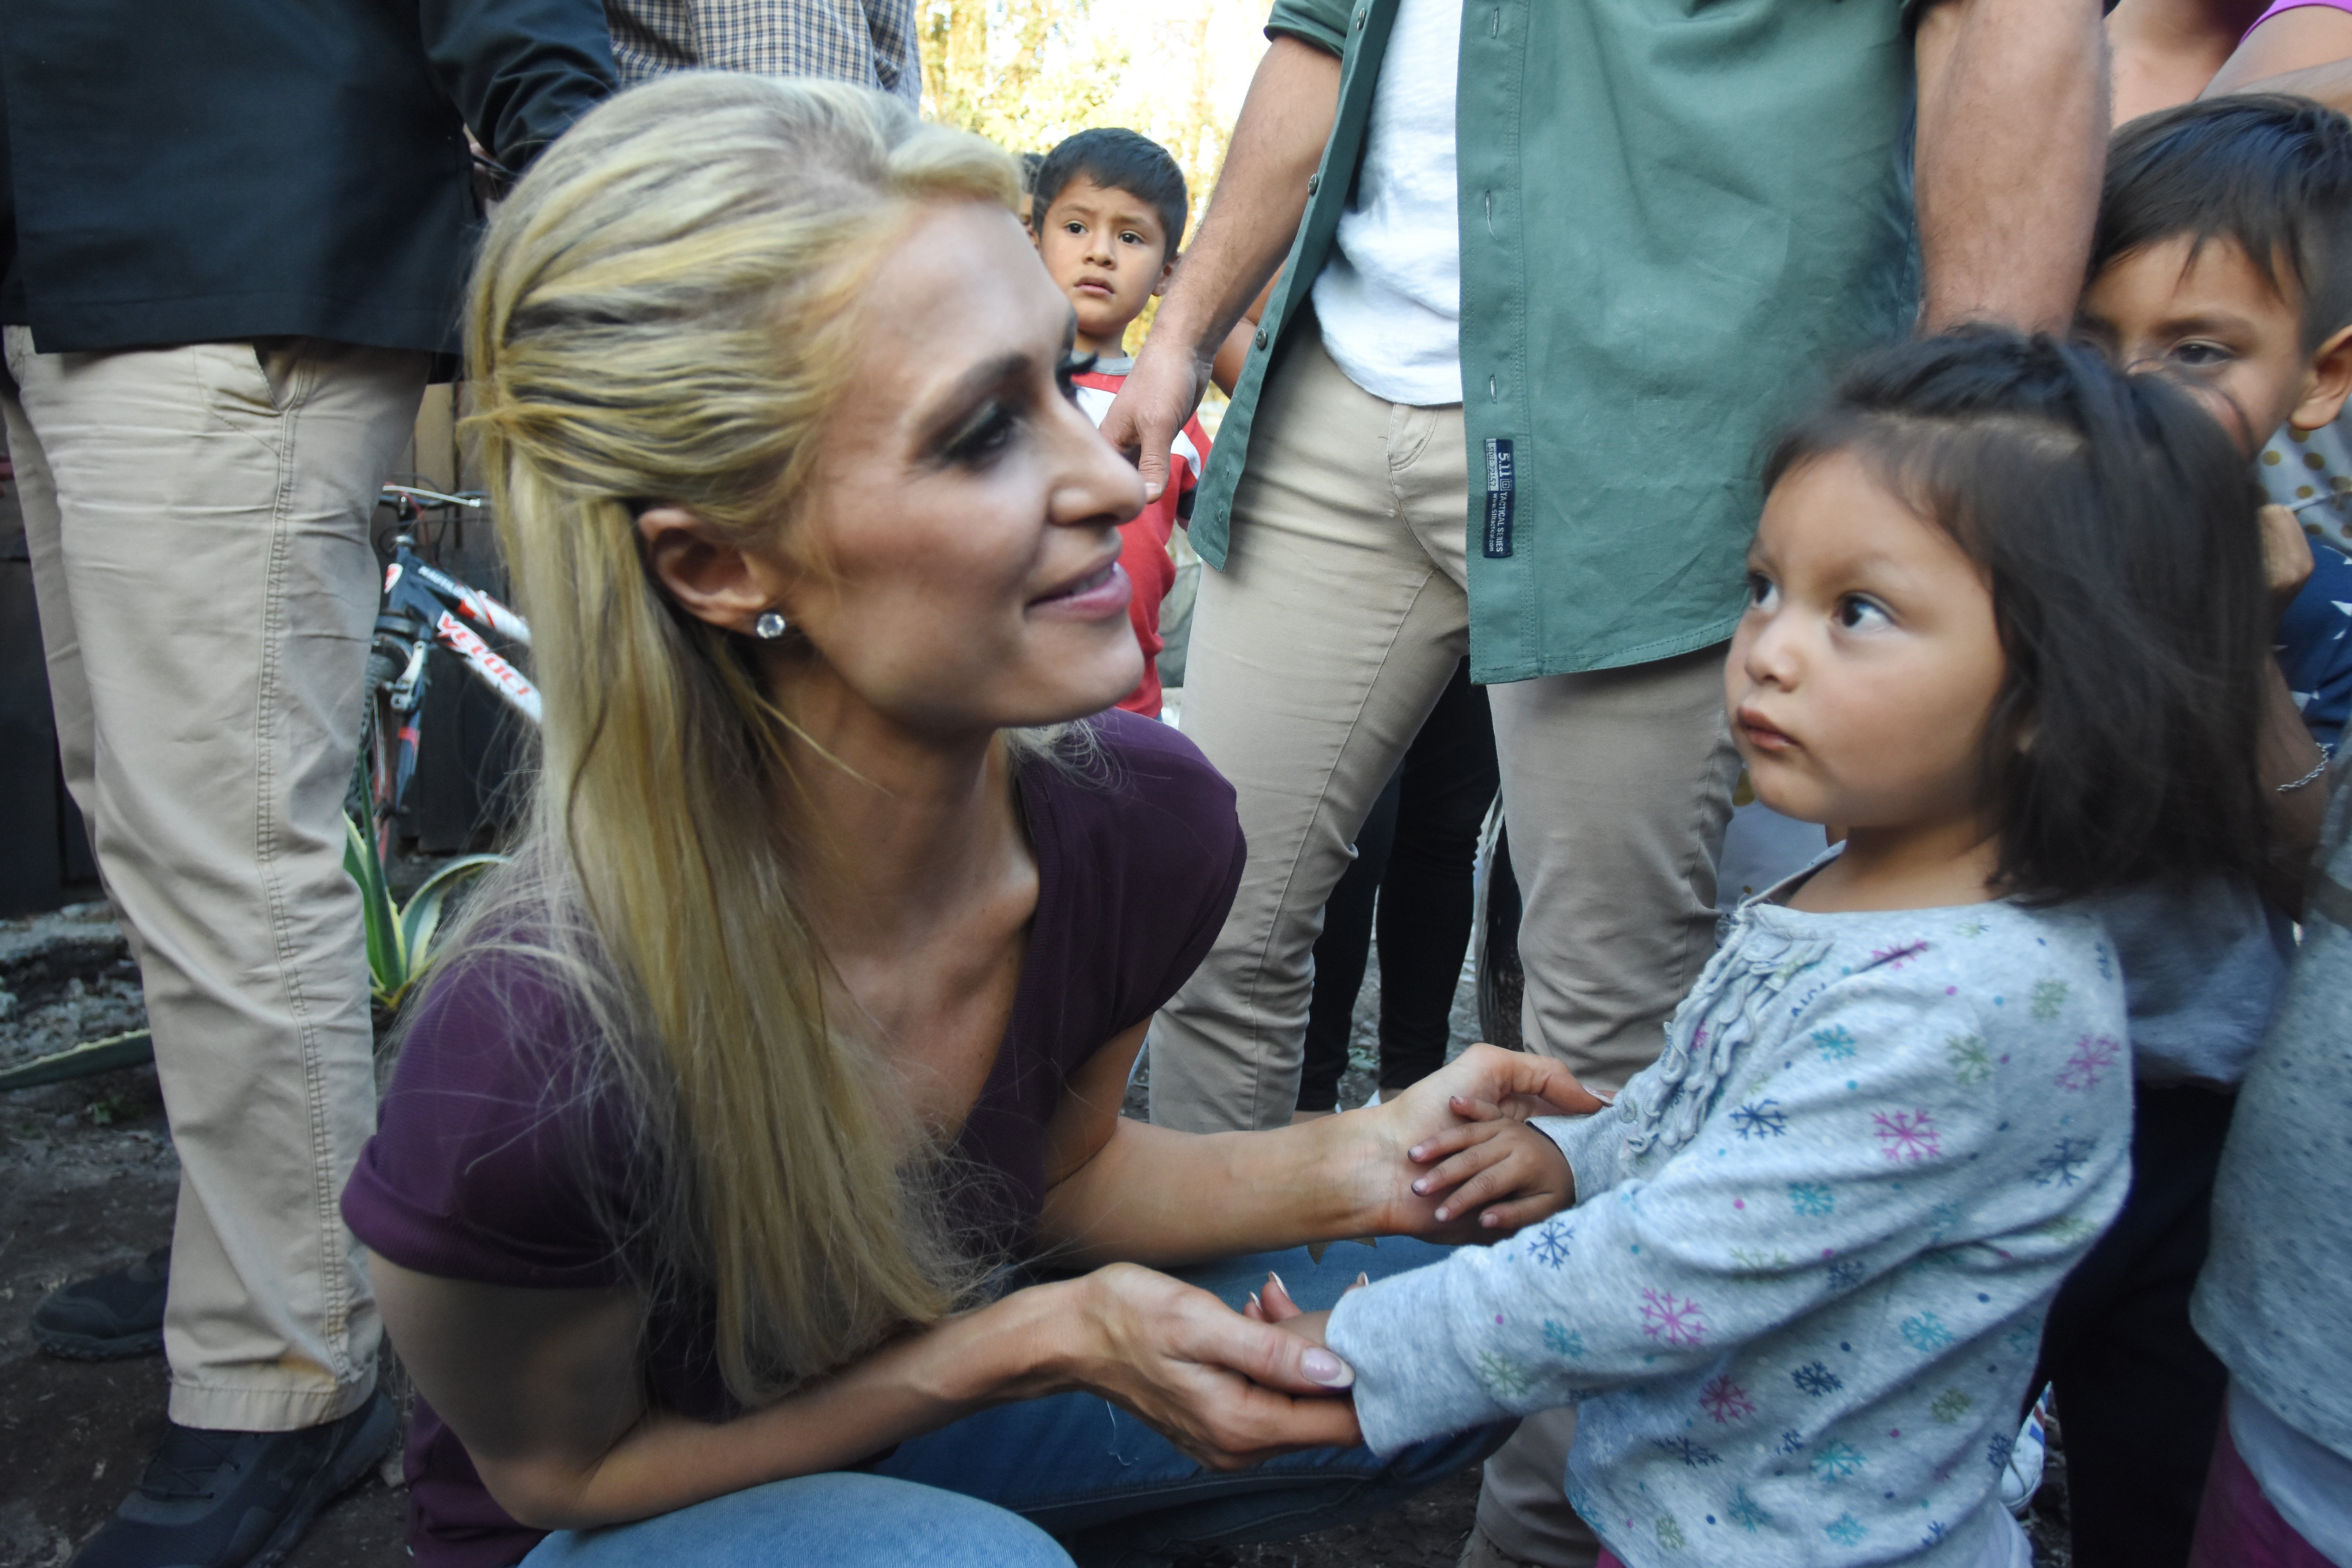 Paris Hilton on November 12, 2018 in Xochimilco, Mexico | Source: Getty Images